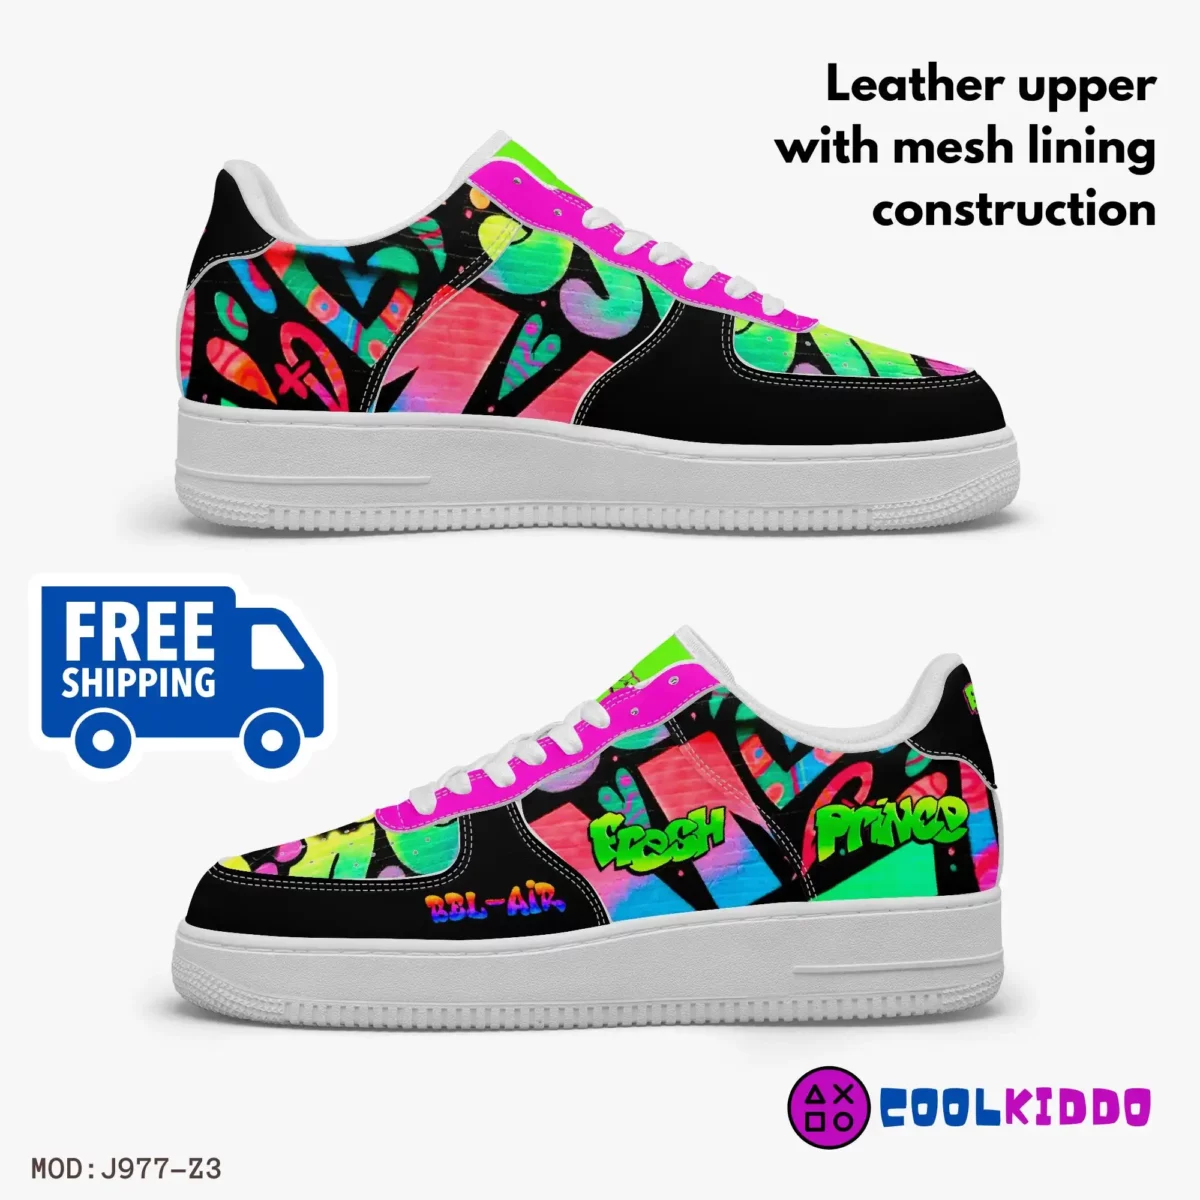 Custom Fresh Prince of Bel-Air AF1 Low-Top Leather Sneakers, Casual Shoes for any season. 90’s TV Show Inspired Cool Kiddo 22